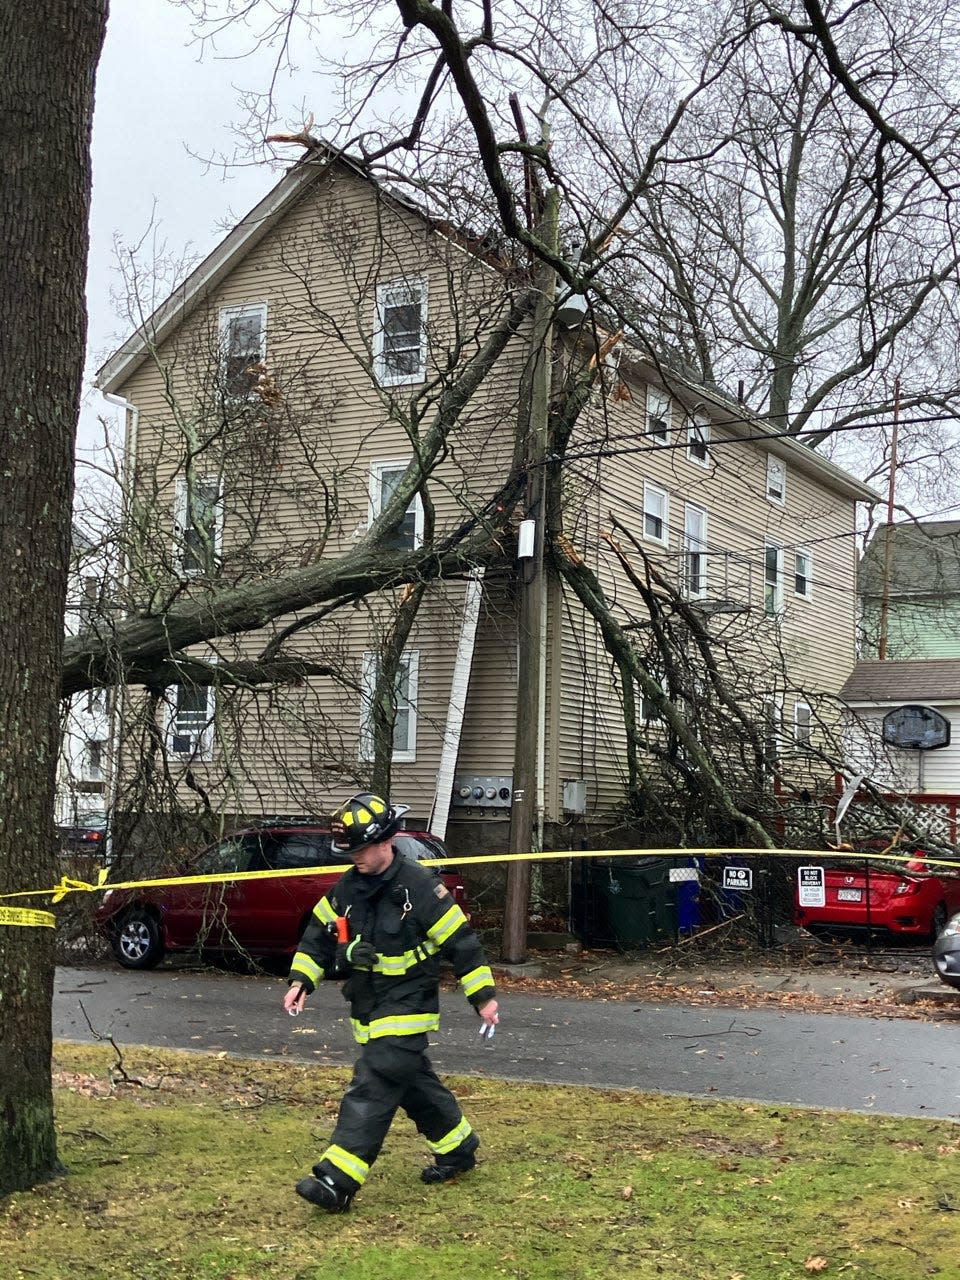 A tree on Seabury Street broke off due to heavy winds Monday morning, crashing into a telephone pole with a transformer, which crashed into a house at 238 Seabury.